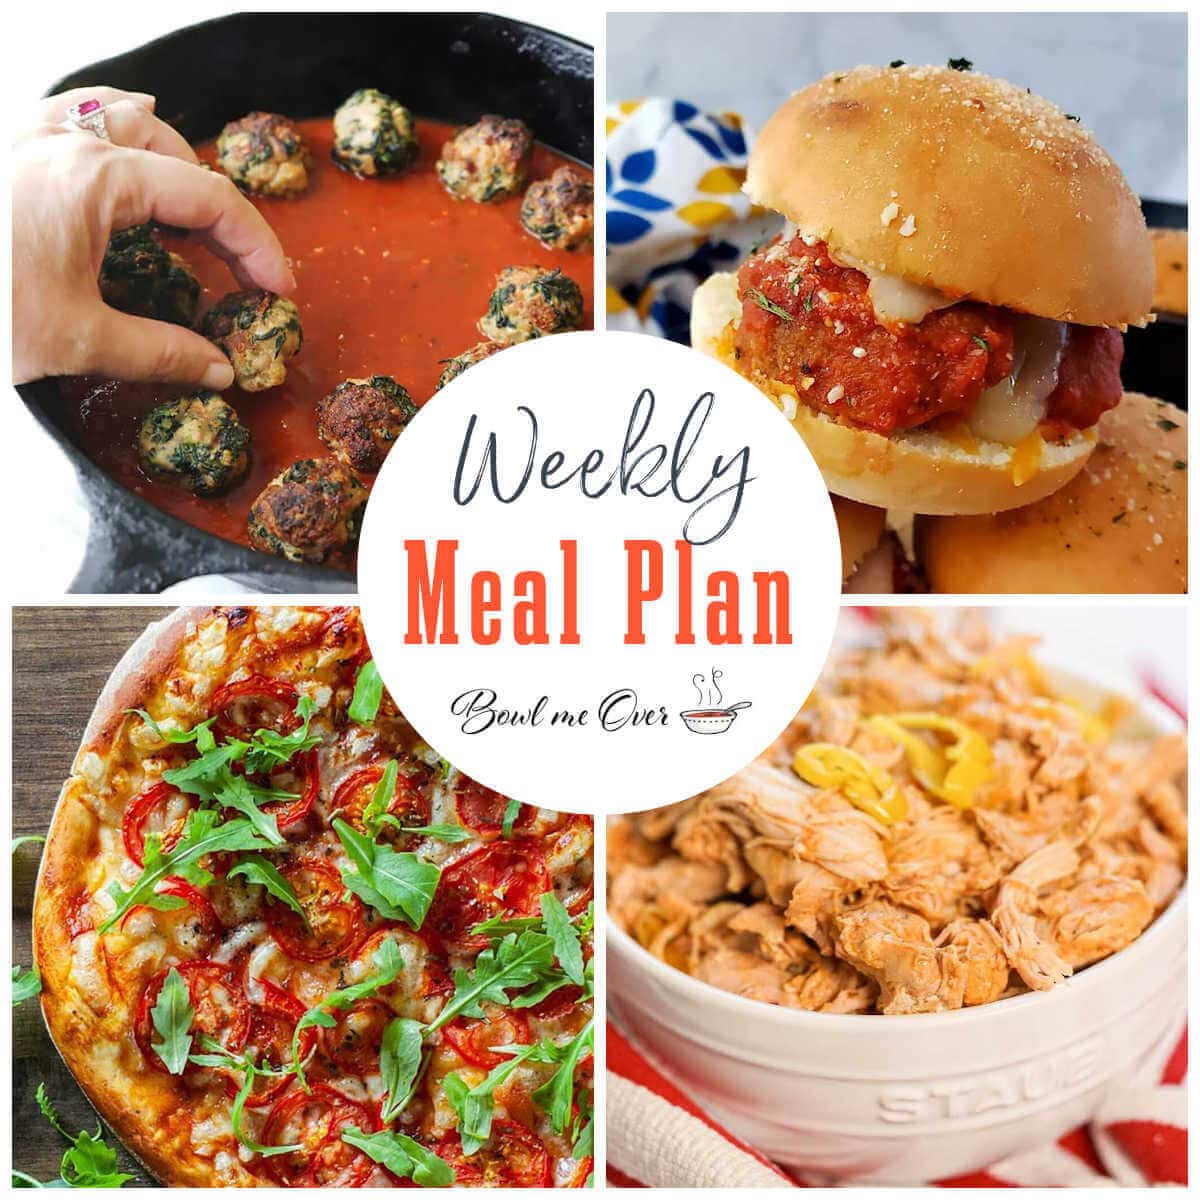 Photos for weekly meal plan 2, with print overlay for social media. 